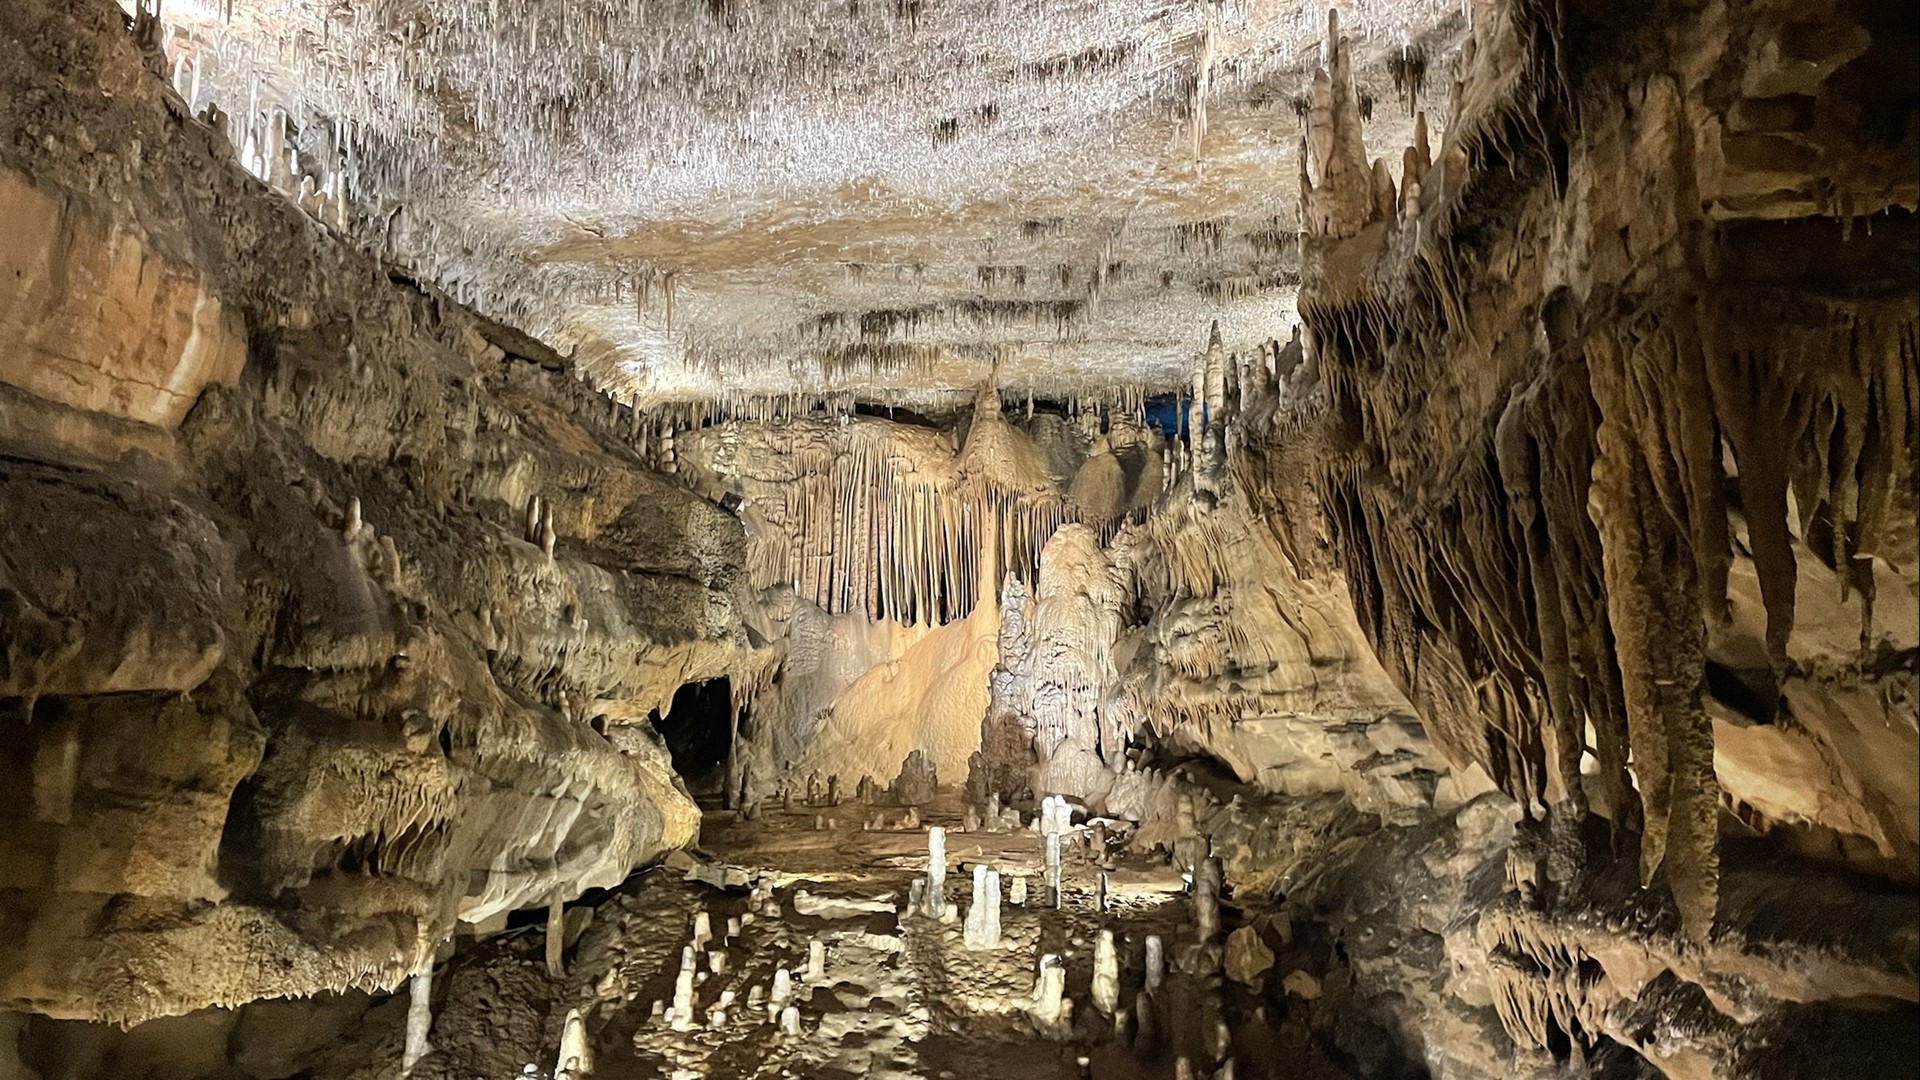 Marengo Cave, Indiana's most famous cave, was declared a U.S. National Natural Landmark in 1984.